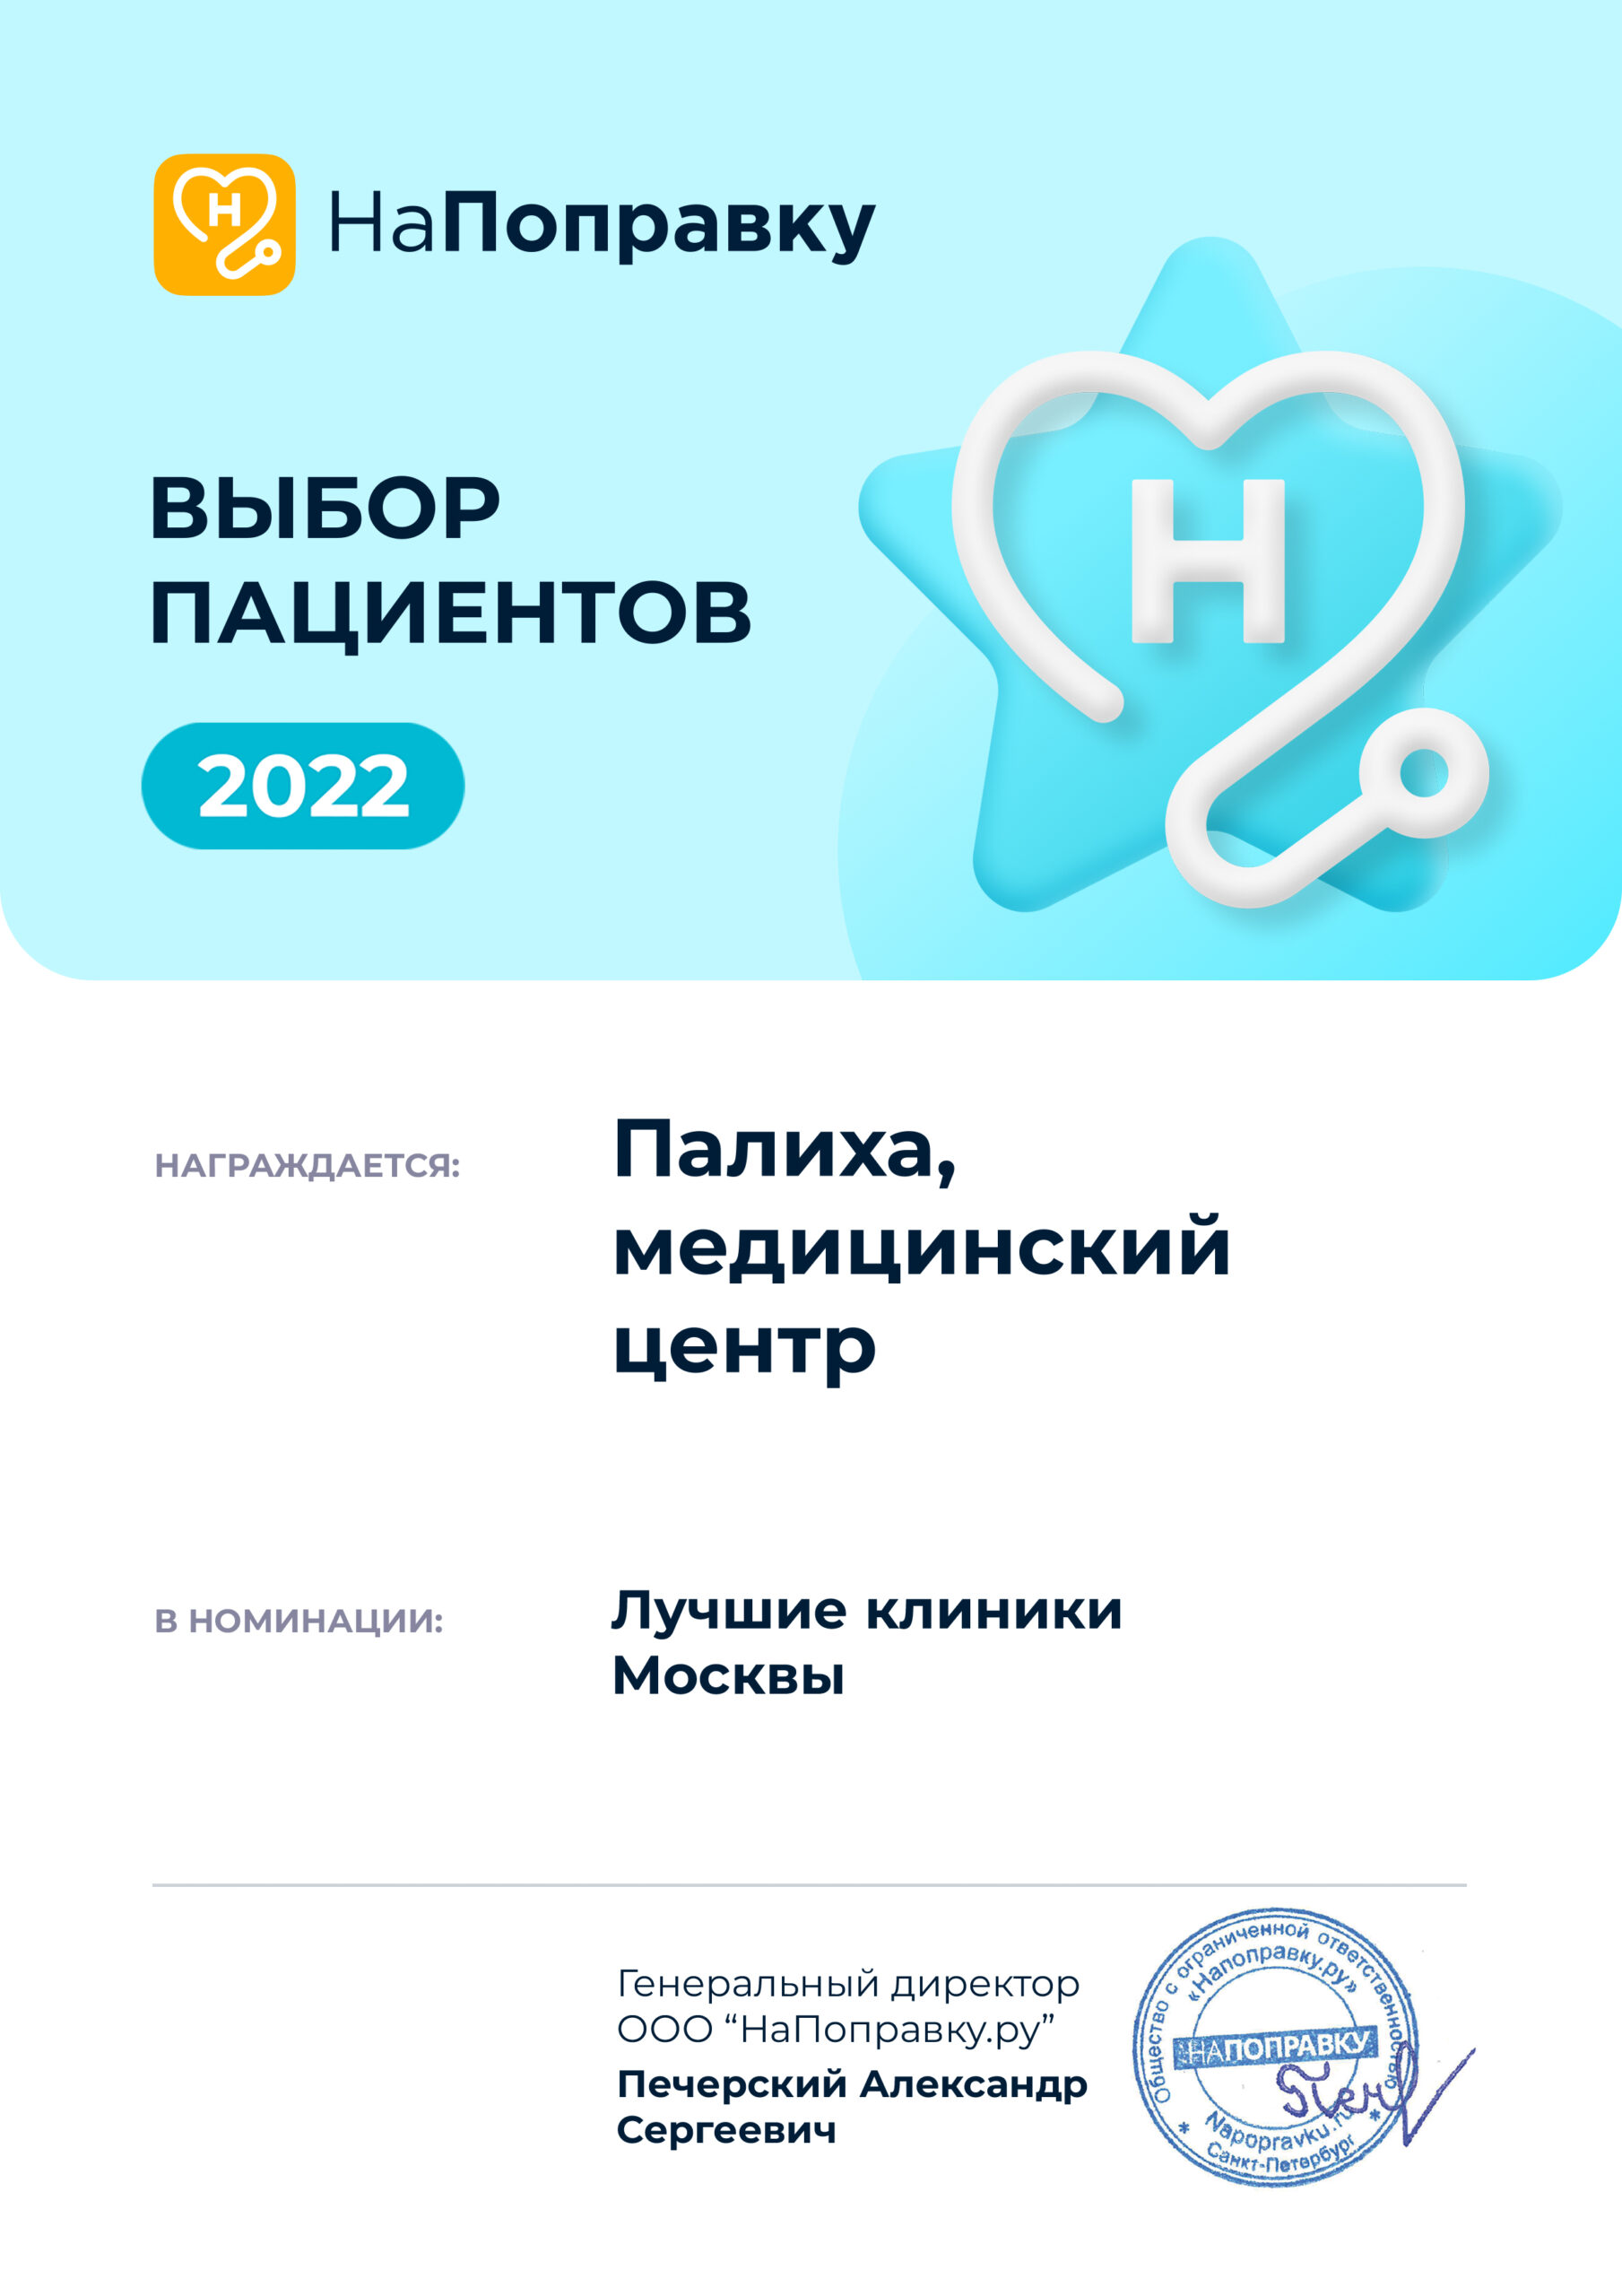 <br />
<b>Warning</b>:  Illegal string offset 'alt' in <b>/var/www/u0676444/data/www/palikha-clinic.ru/wp-content/themes/paliha/template-parts/section-awards.php</b> on line <b>20</b><br />
h